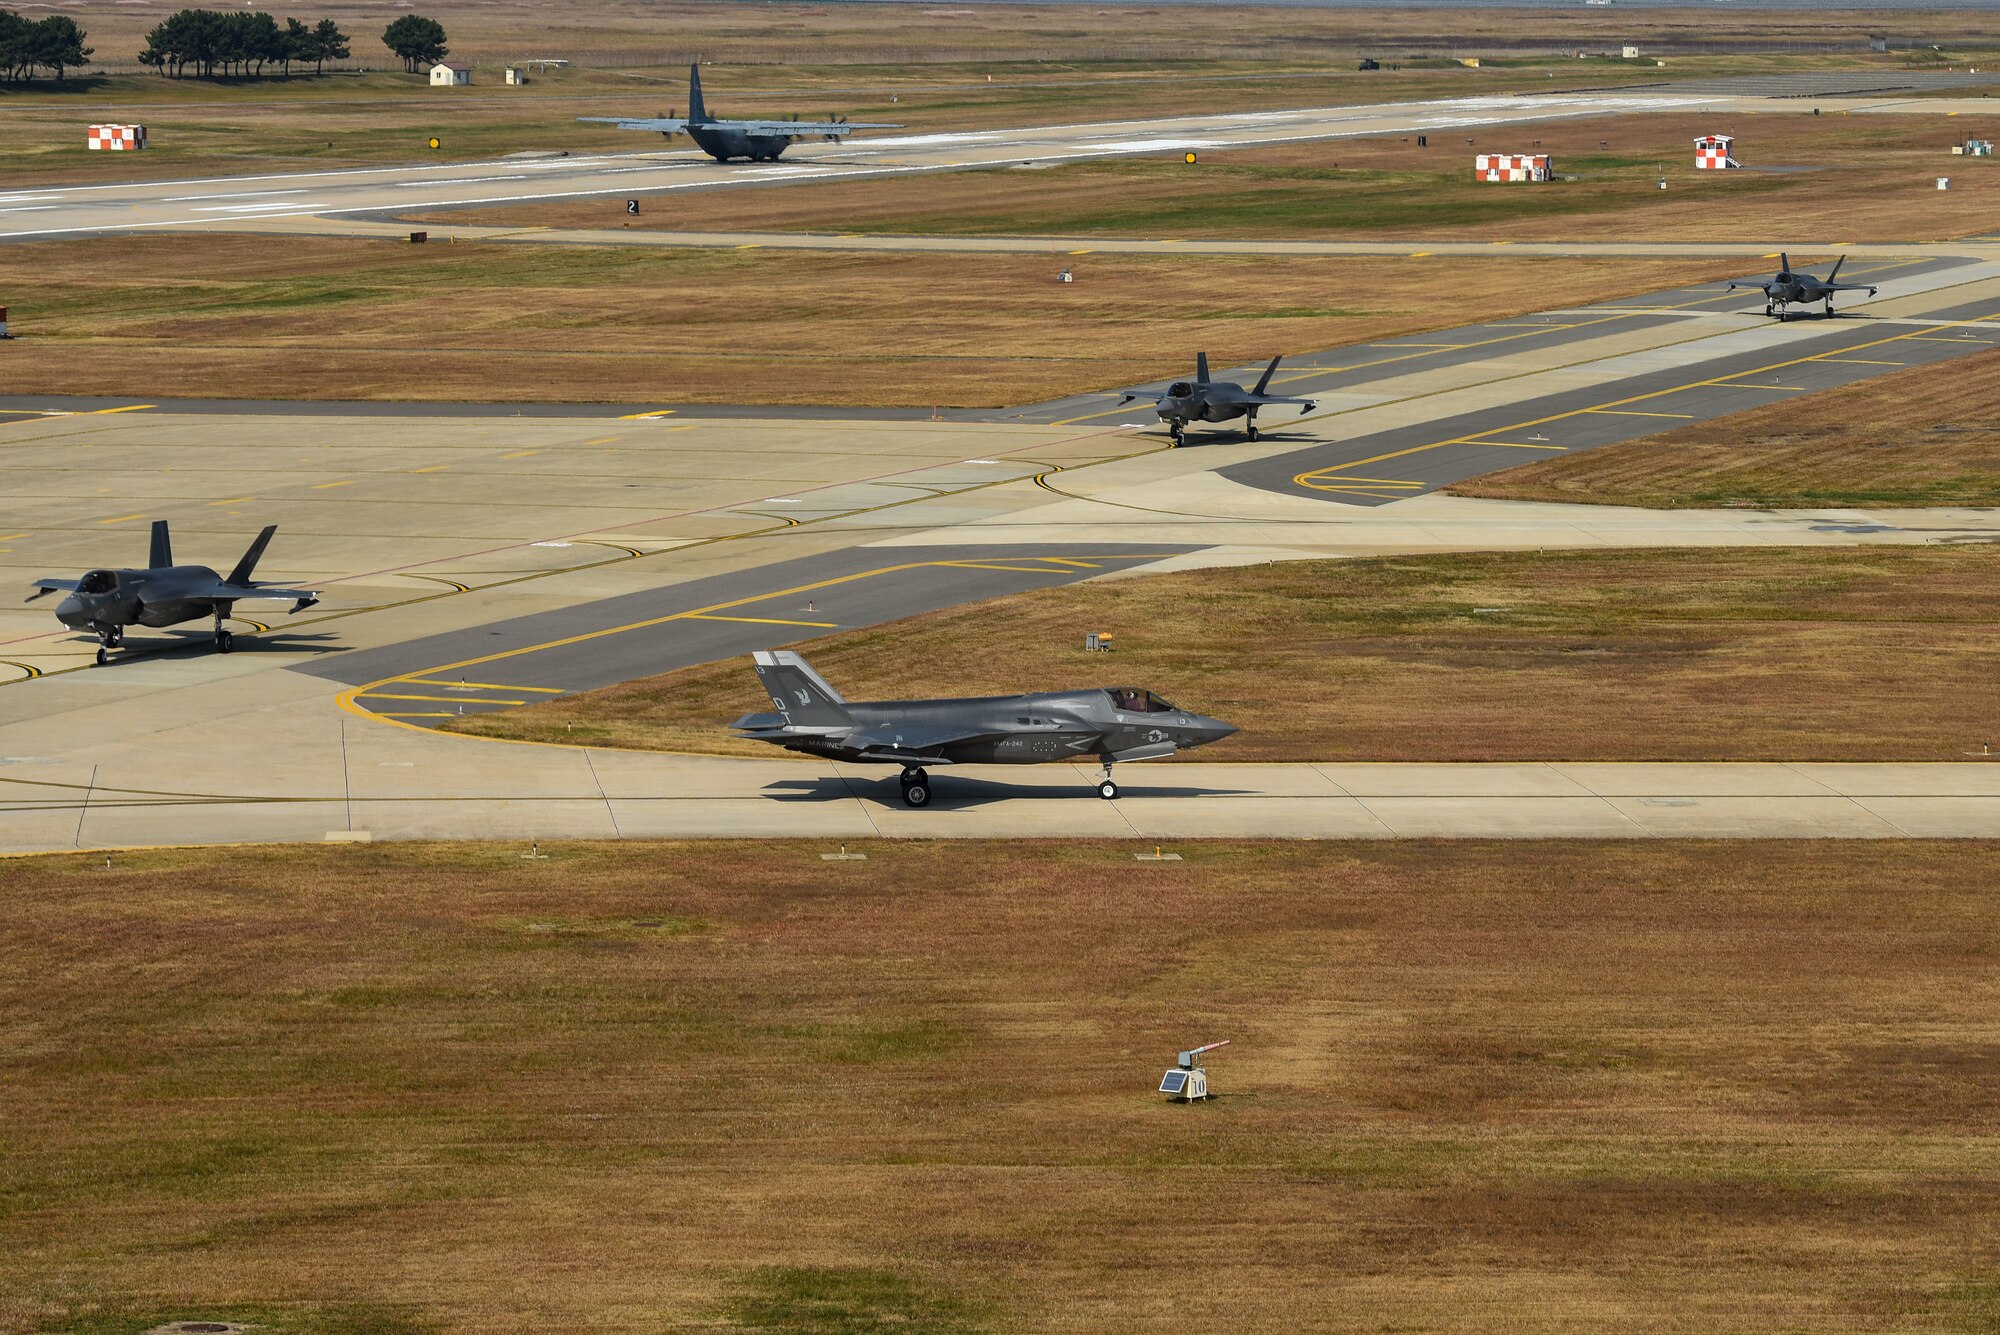 Four U.S. Marine Corps F-35B Lightning II aircraft with Marine Fighter Attack Squadron (VMFA) 242 taxi down the flightline at Kunsan Air Base, Republic of Korea, Oct. 31, 2022. The aircraft traveled to Kunsan as a part of the Pacific Air Forces command sponsored VIGILANT STORM 23 training event. VIGILANT STORM integrates U.S. and ROK forces to train on mutual support procedures and maximizes command and control capabilities to improve understanding and trust between the two nations. (U.S. Air Force photo by Tech. Sgt. Timothy Dischinat)